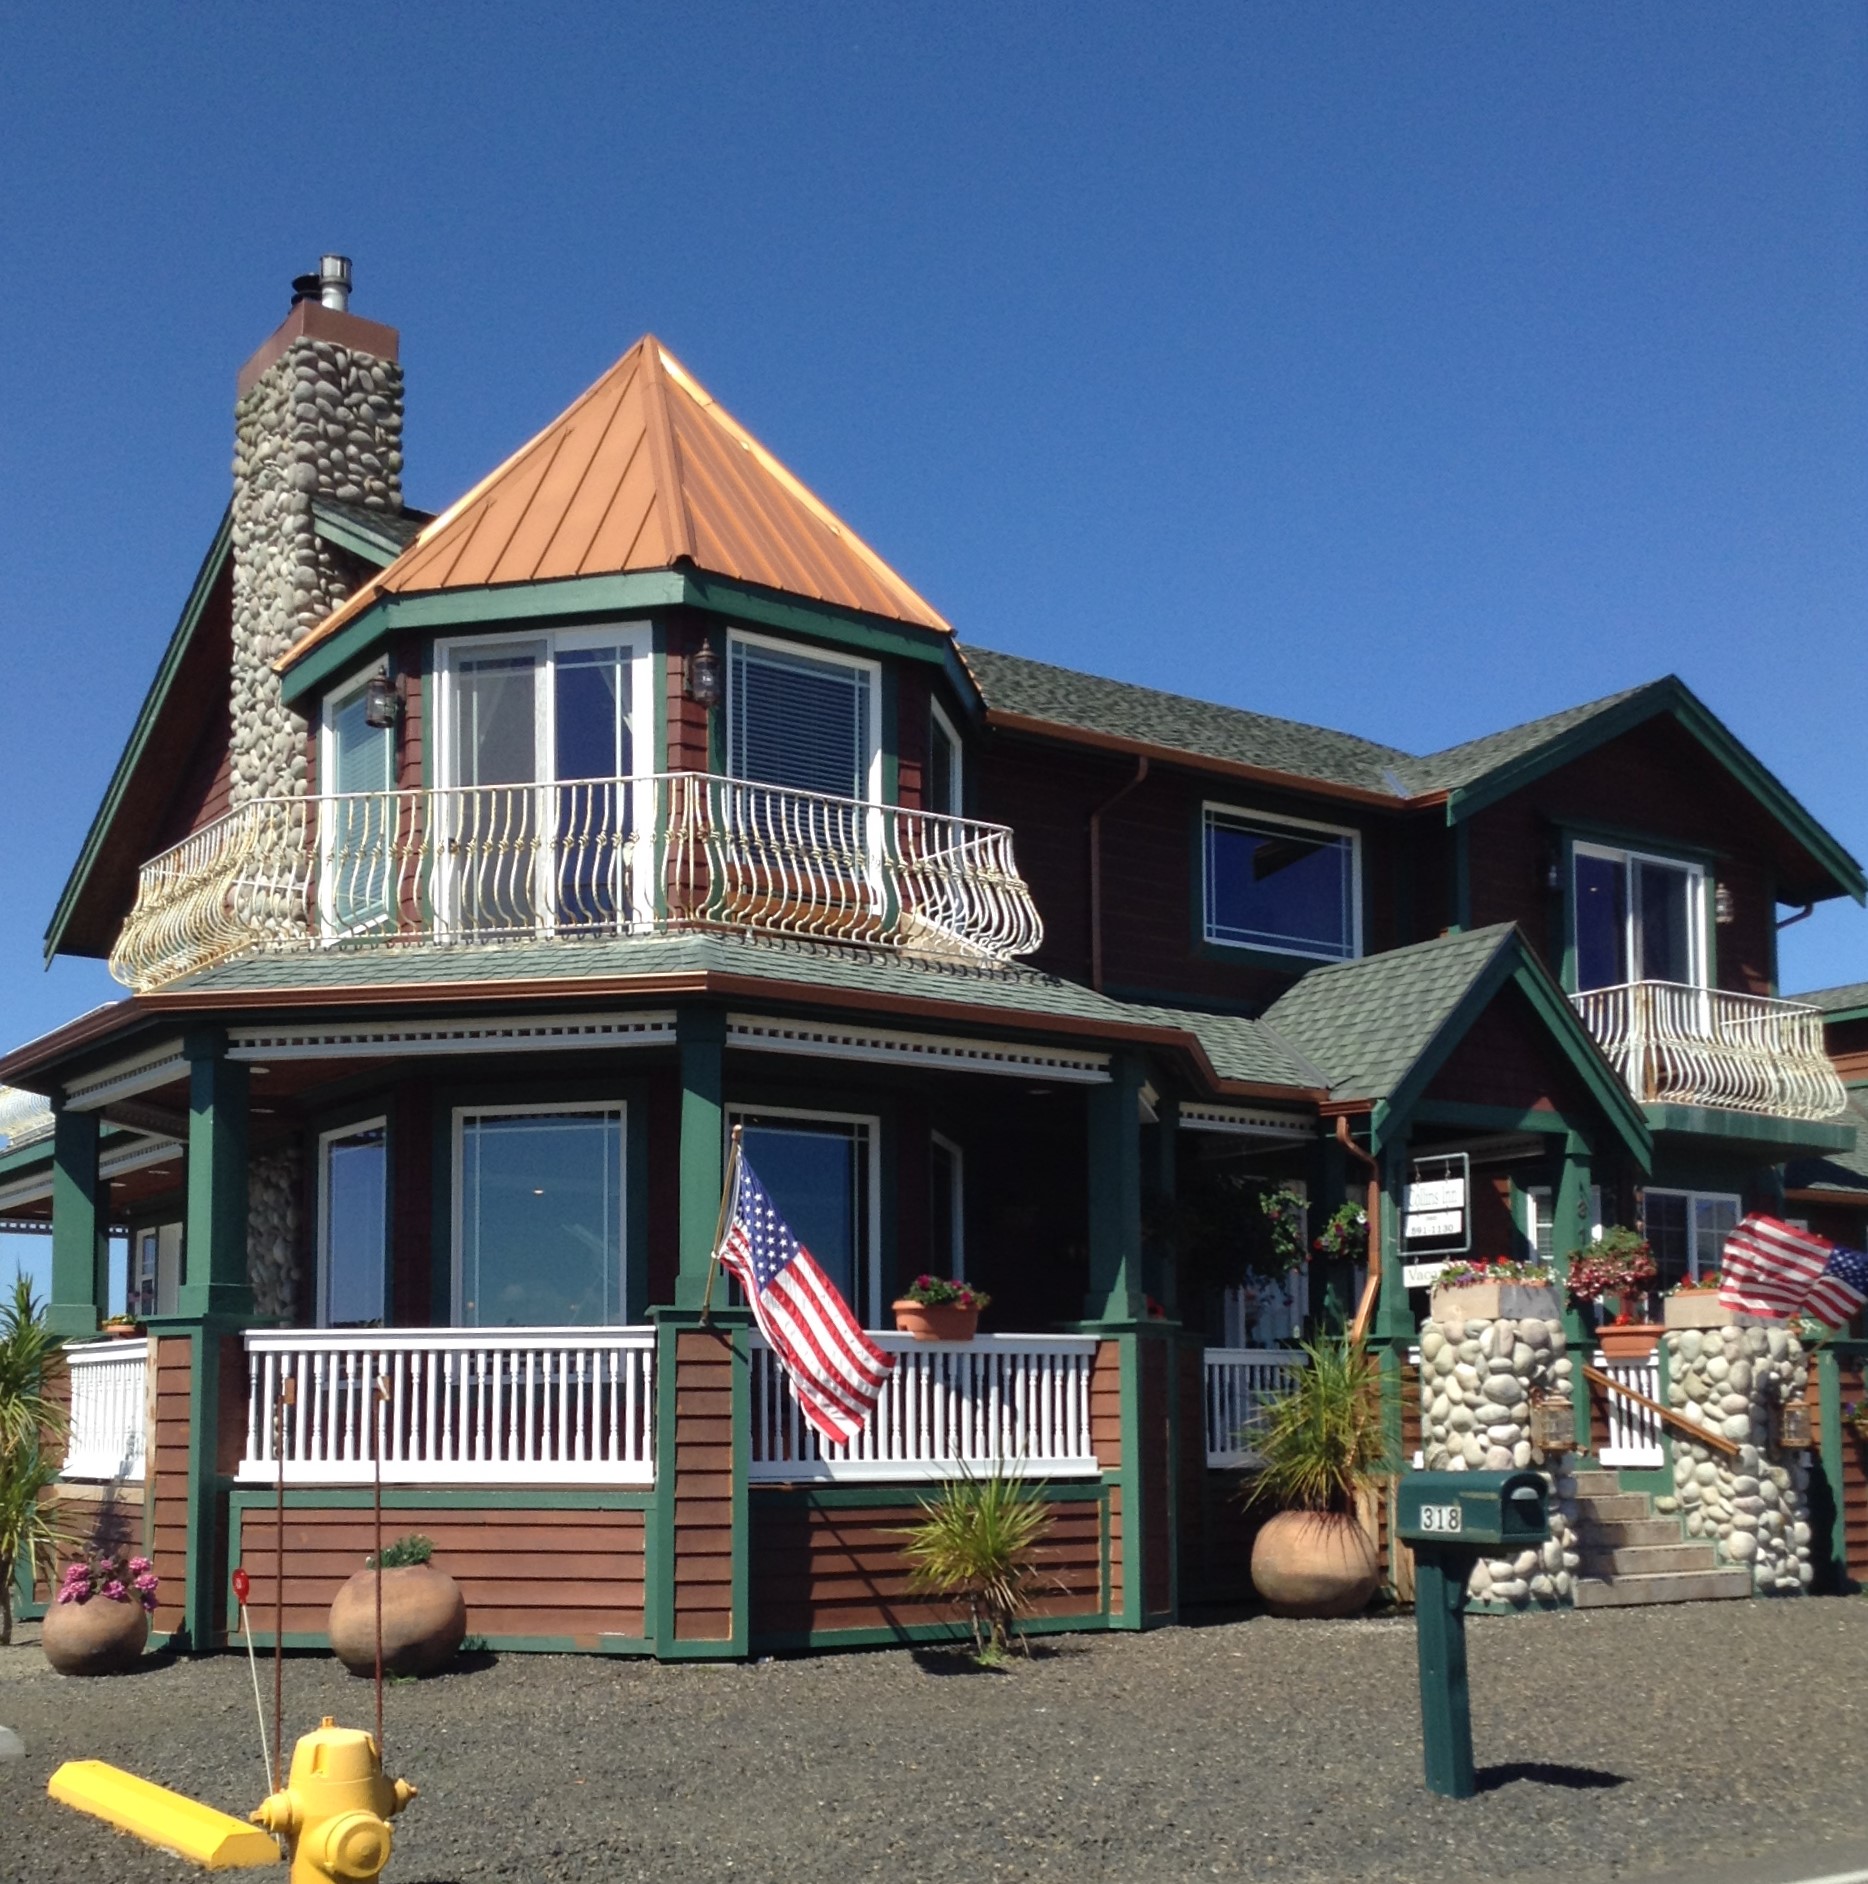 The Collins Inn and Seaside Cottages, Oceans Shores, Washington USA #graysharborbeaches